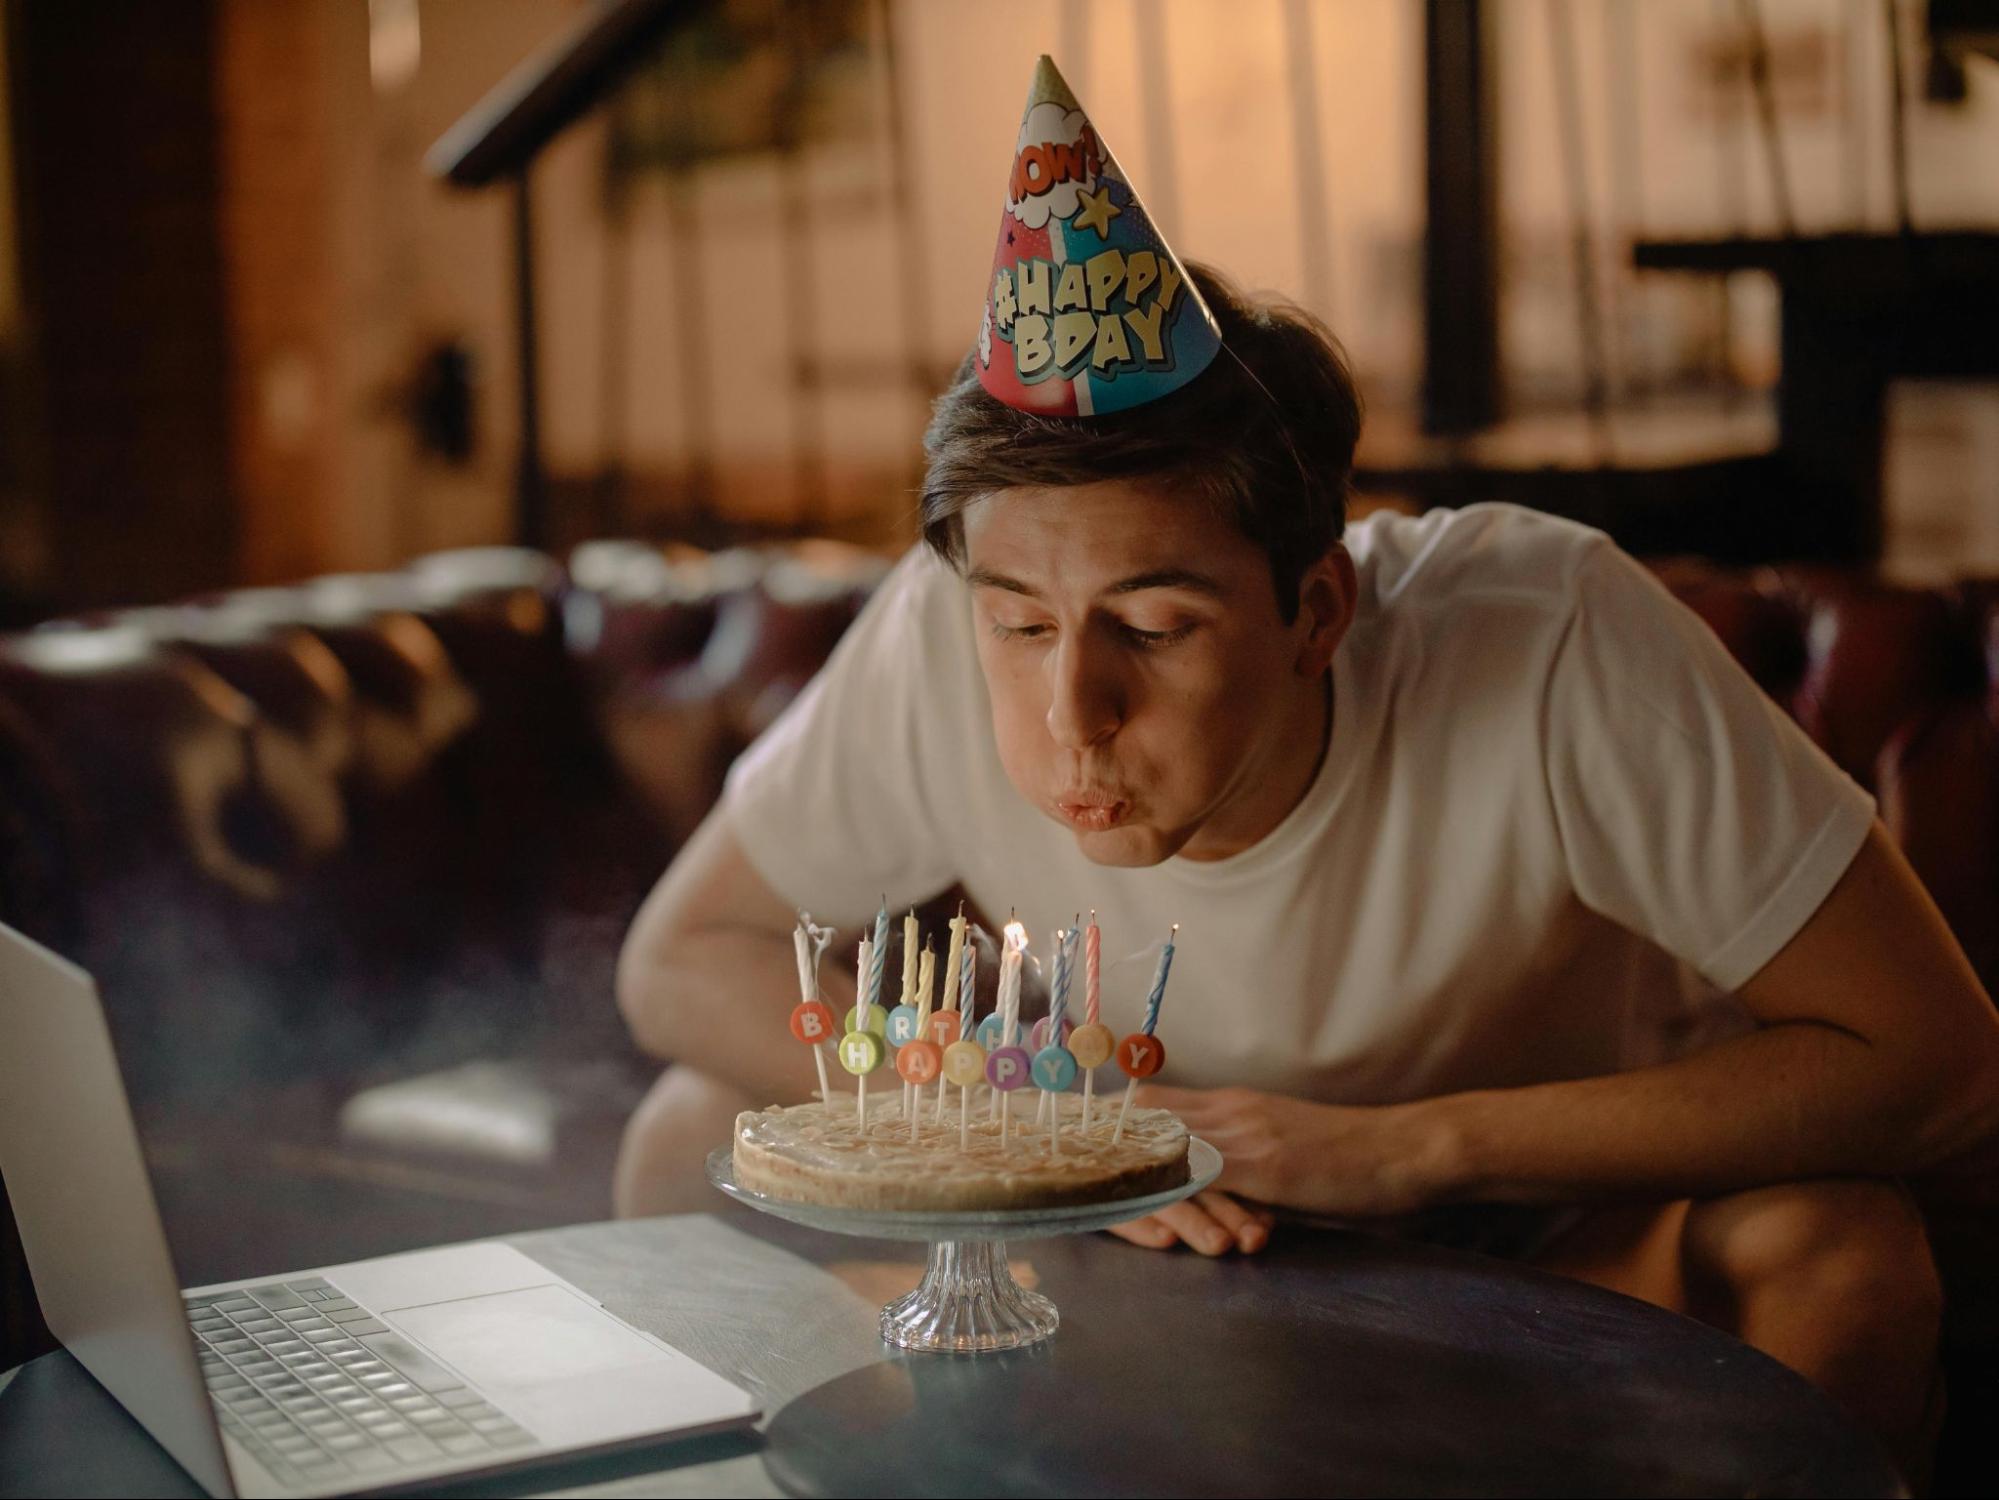 Coworker blowing out candles on cake at virtual birthday party